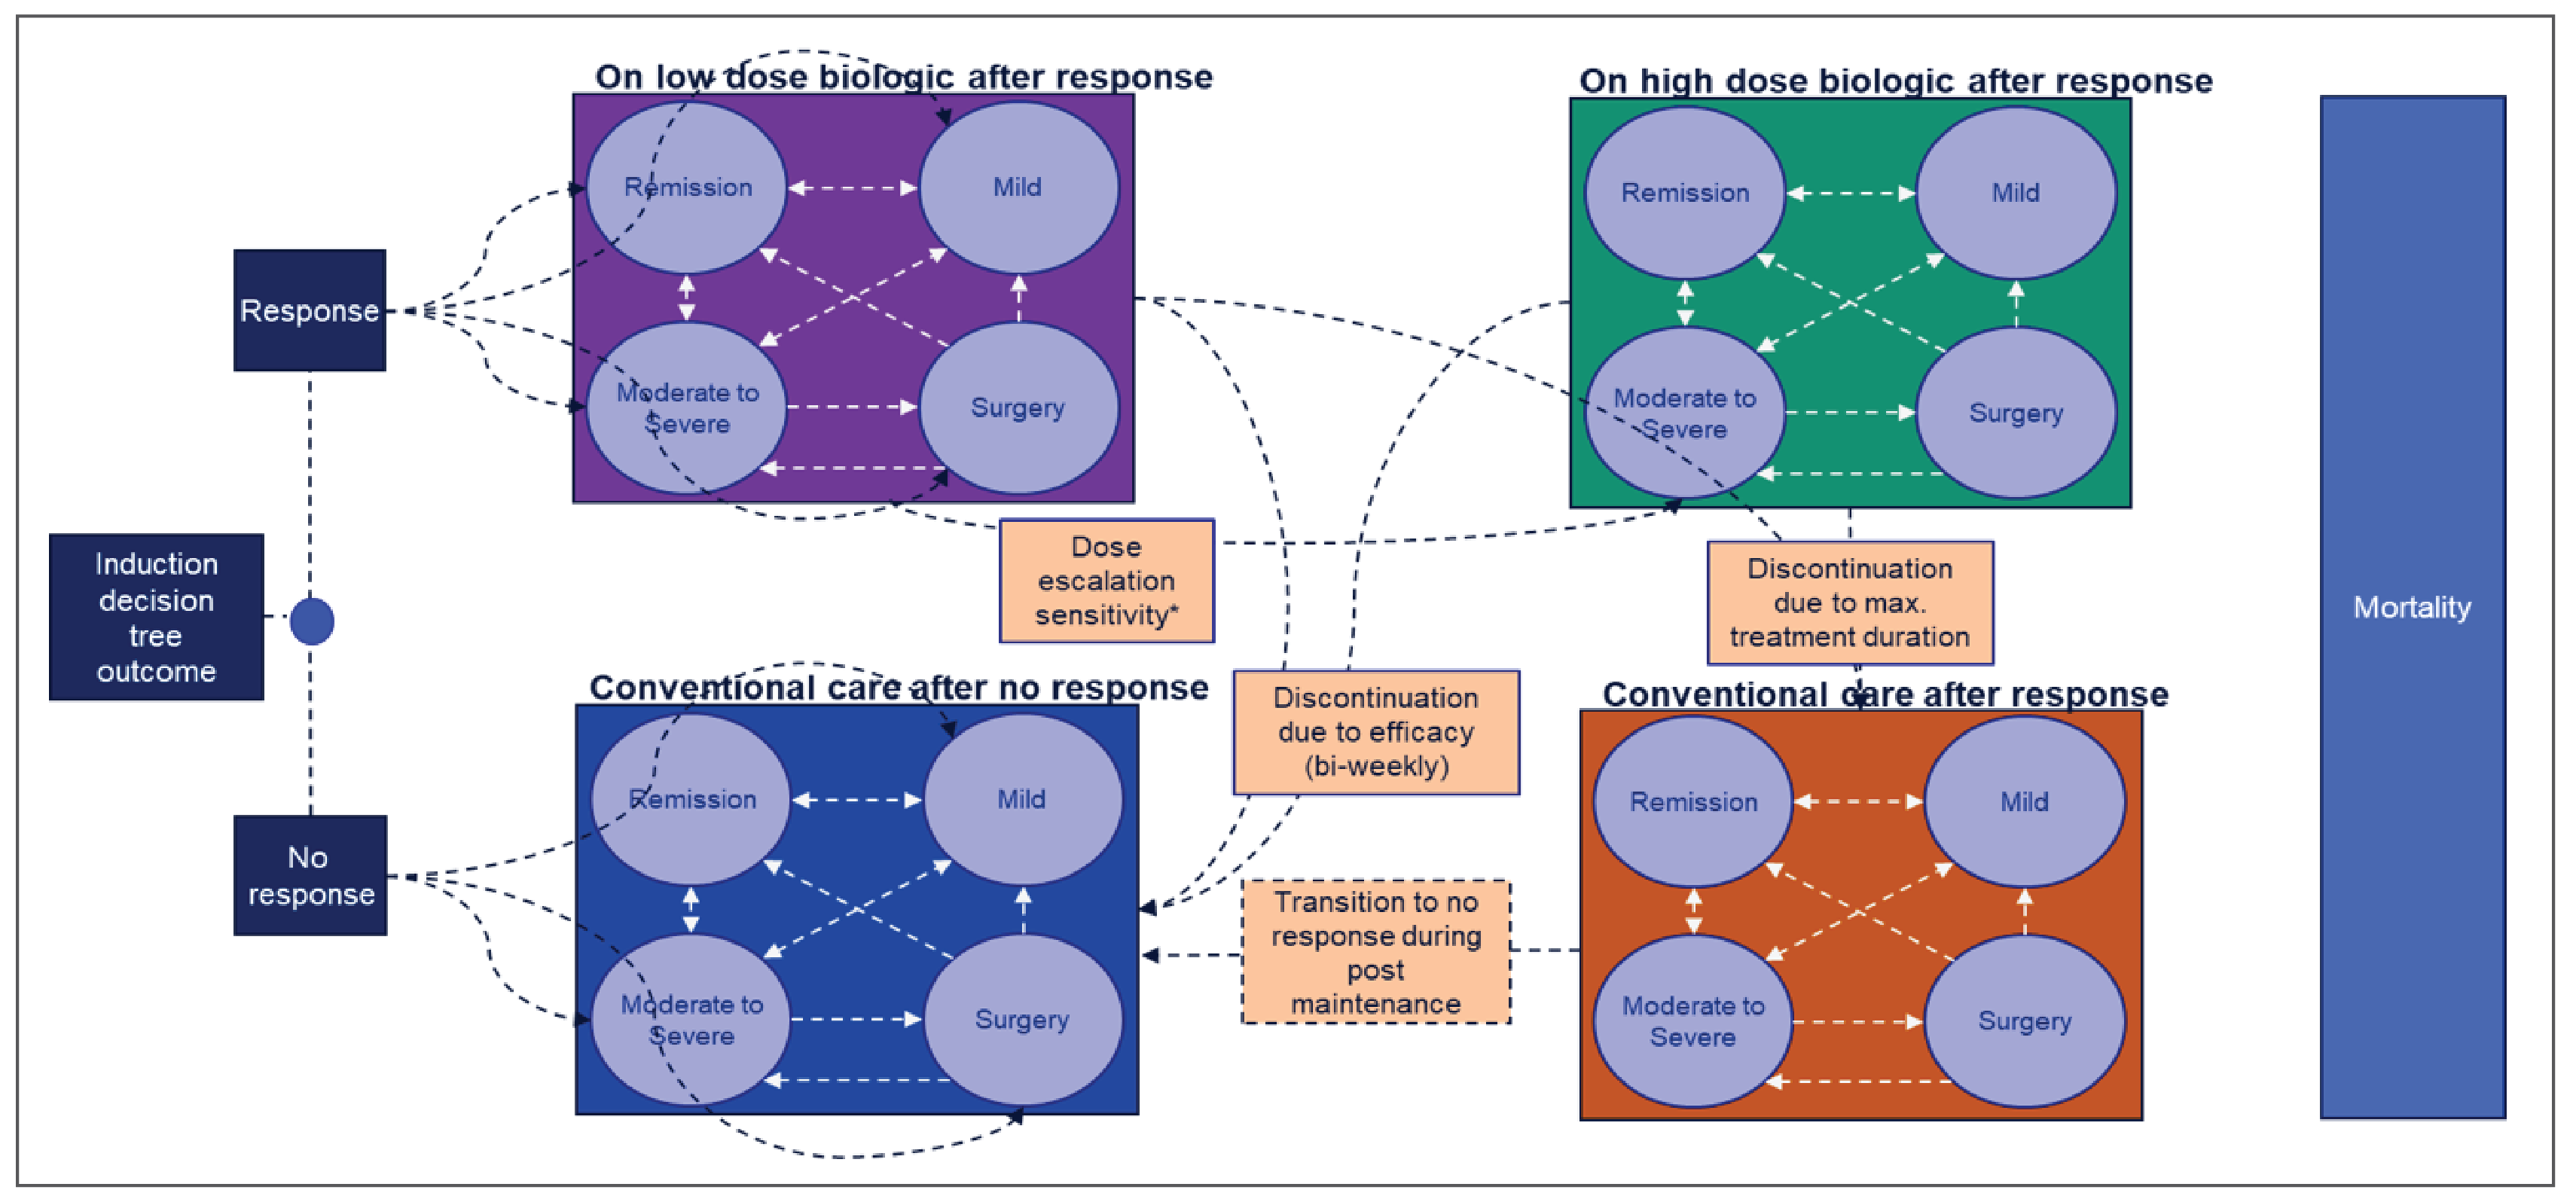 A Markov model with 4 main health states: moderate to severe CD, mild CD, remission, and surgery. Each of these 4 health states is repeated for 4 matrices: on low-dose biologics after response, on high dose biologics after response,conventional care after no response, and conventional care after response. Patients who experienced a treatment response during the induction period enter the Markov model in one of the health states within the on low-dose after response matrix, while patients who had no response during the induction period enter the Markov model in one of the health states within the conventional care after no response matrix. In each cycle, patients can then transition from the on low-dose after response matrix to any of the other matrices. Patients in the conventional care after no response matrix cannot transition to another matrix. Patients in the on high dose biologics after response, can transition to either conventional care matrix. Patients in the conventional care after response matrix can only transition to the conventional care after no response matrix. Patients can move to the dead state at any time from any other health state.